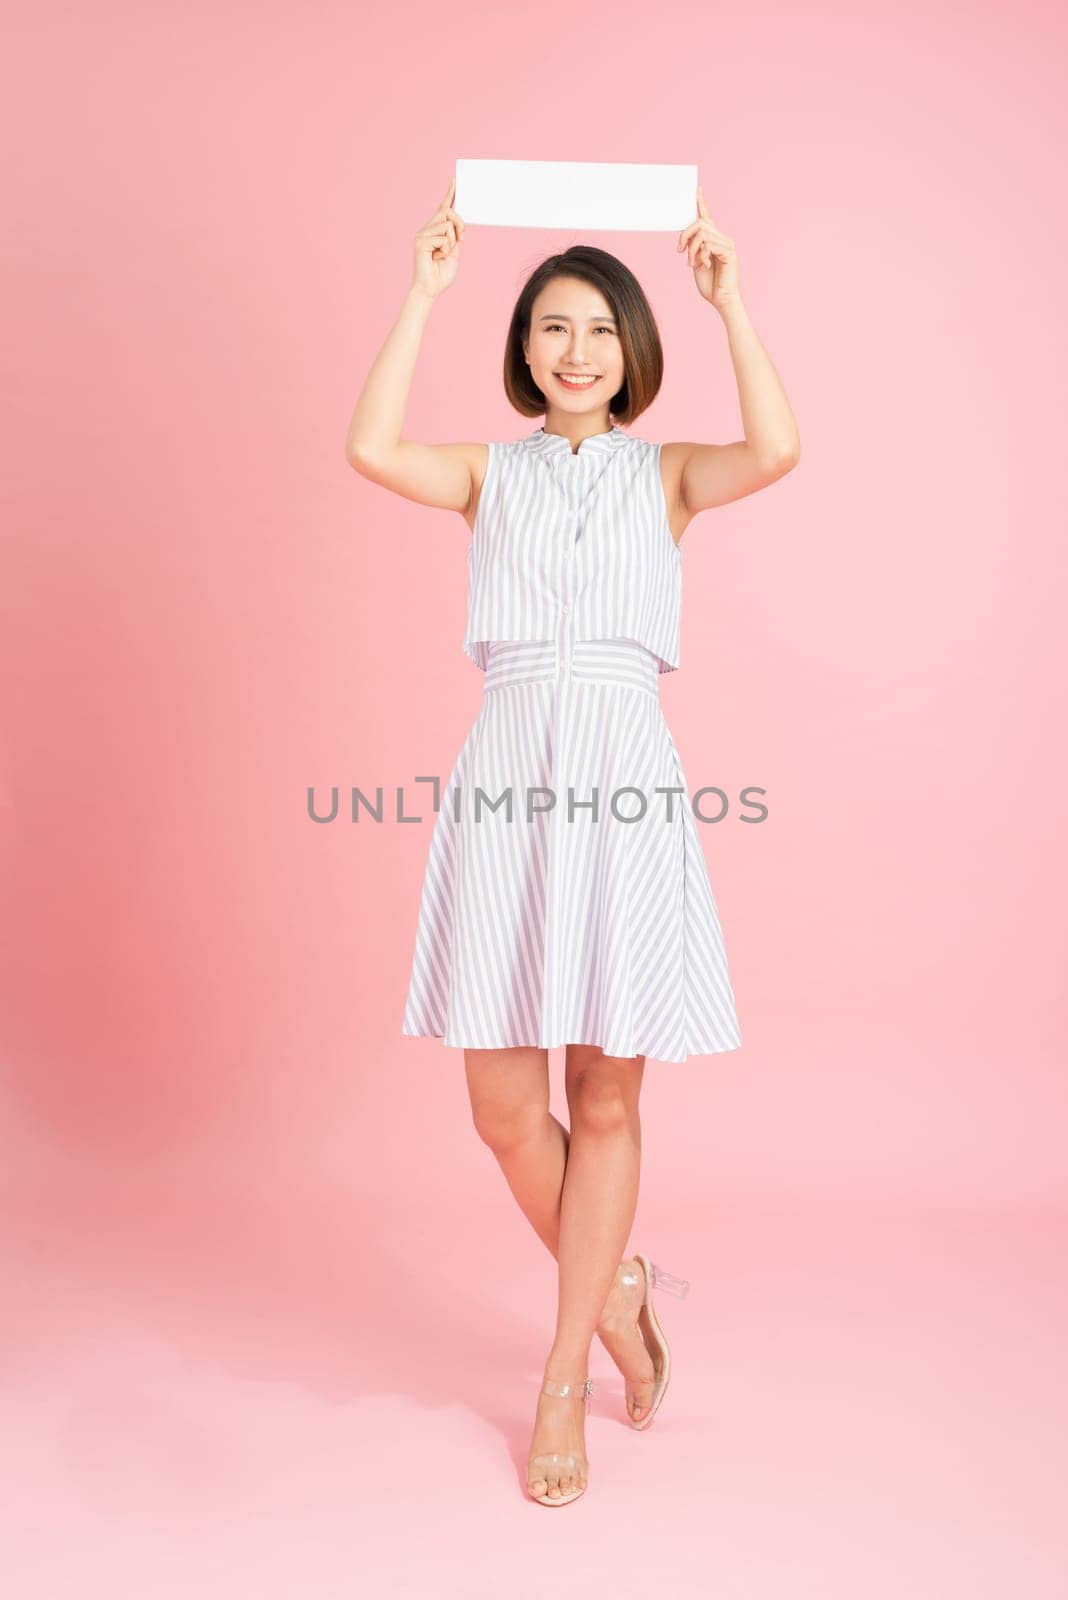 Your text here. Pretty young excited woman holding empty blank board. Studio portrait on white background. Mock up for design by makidotvn